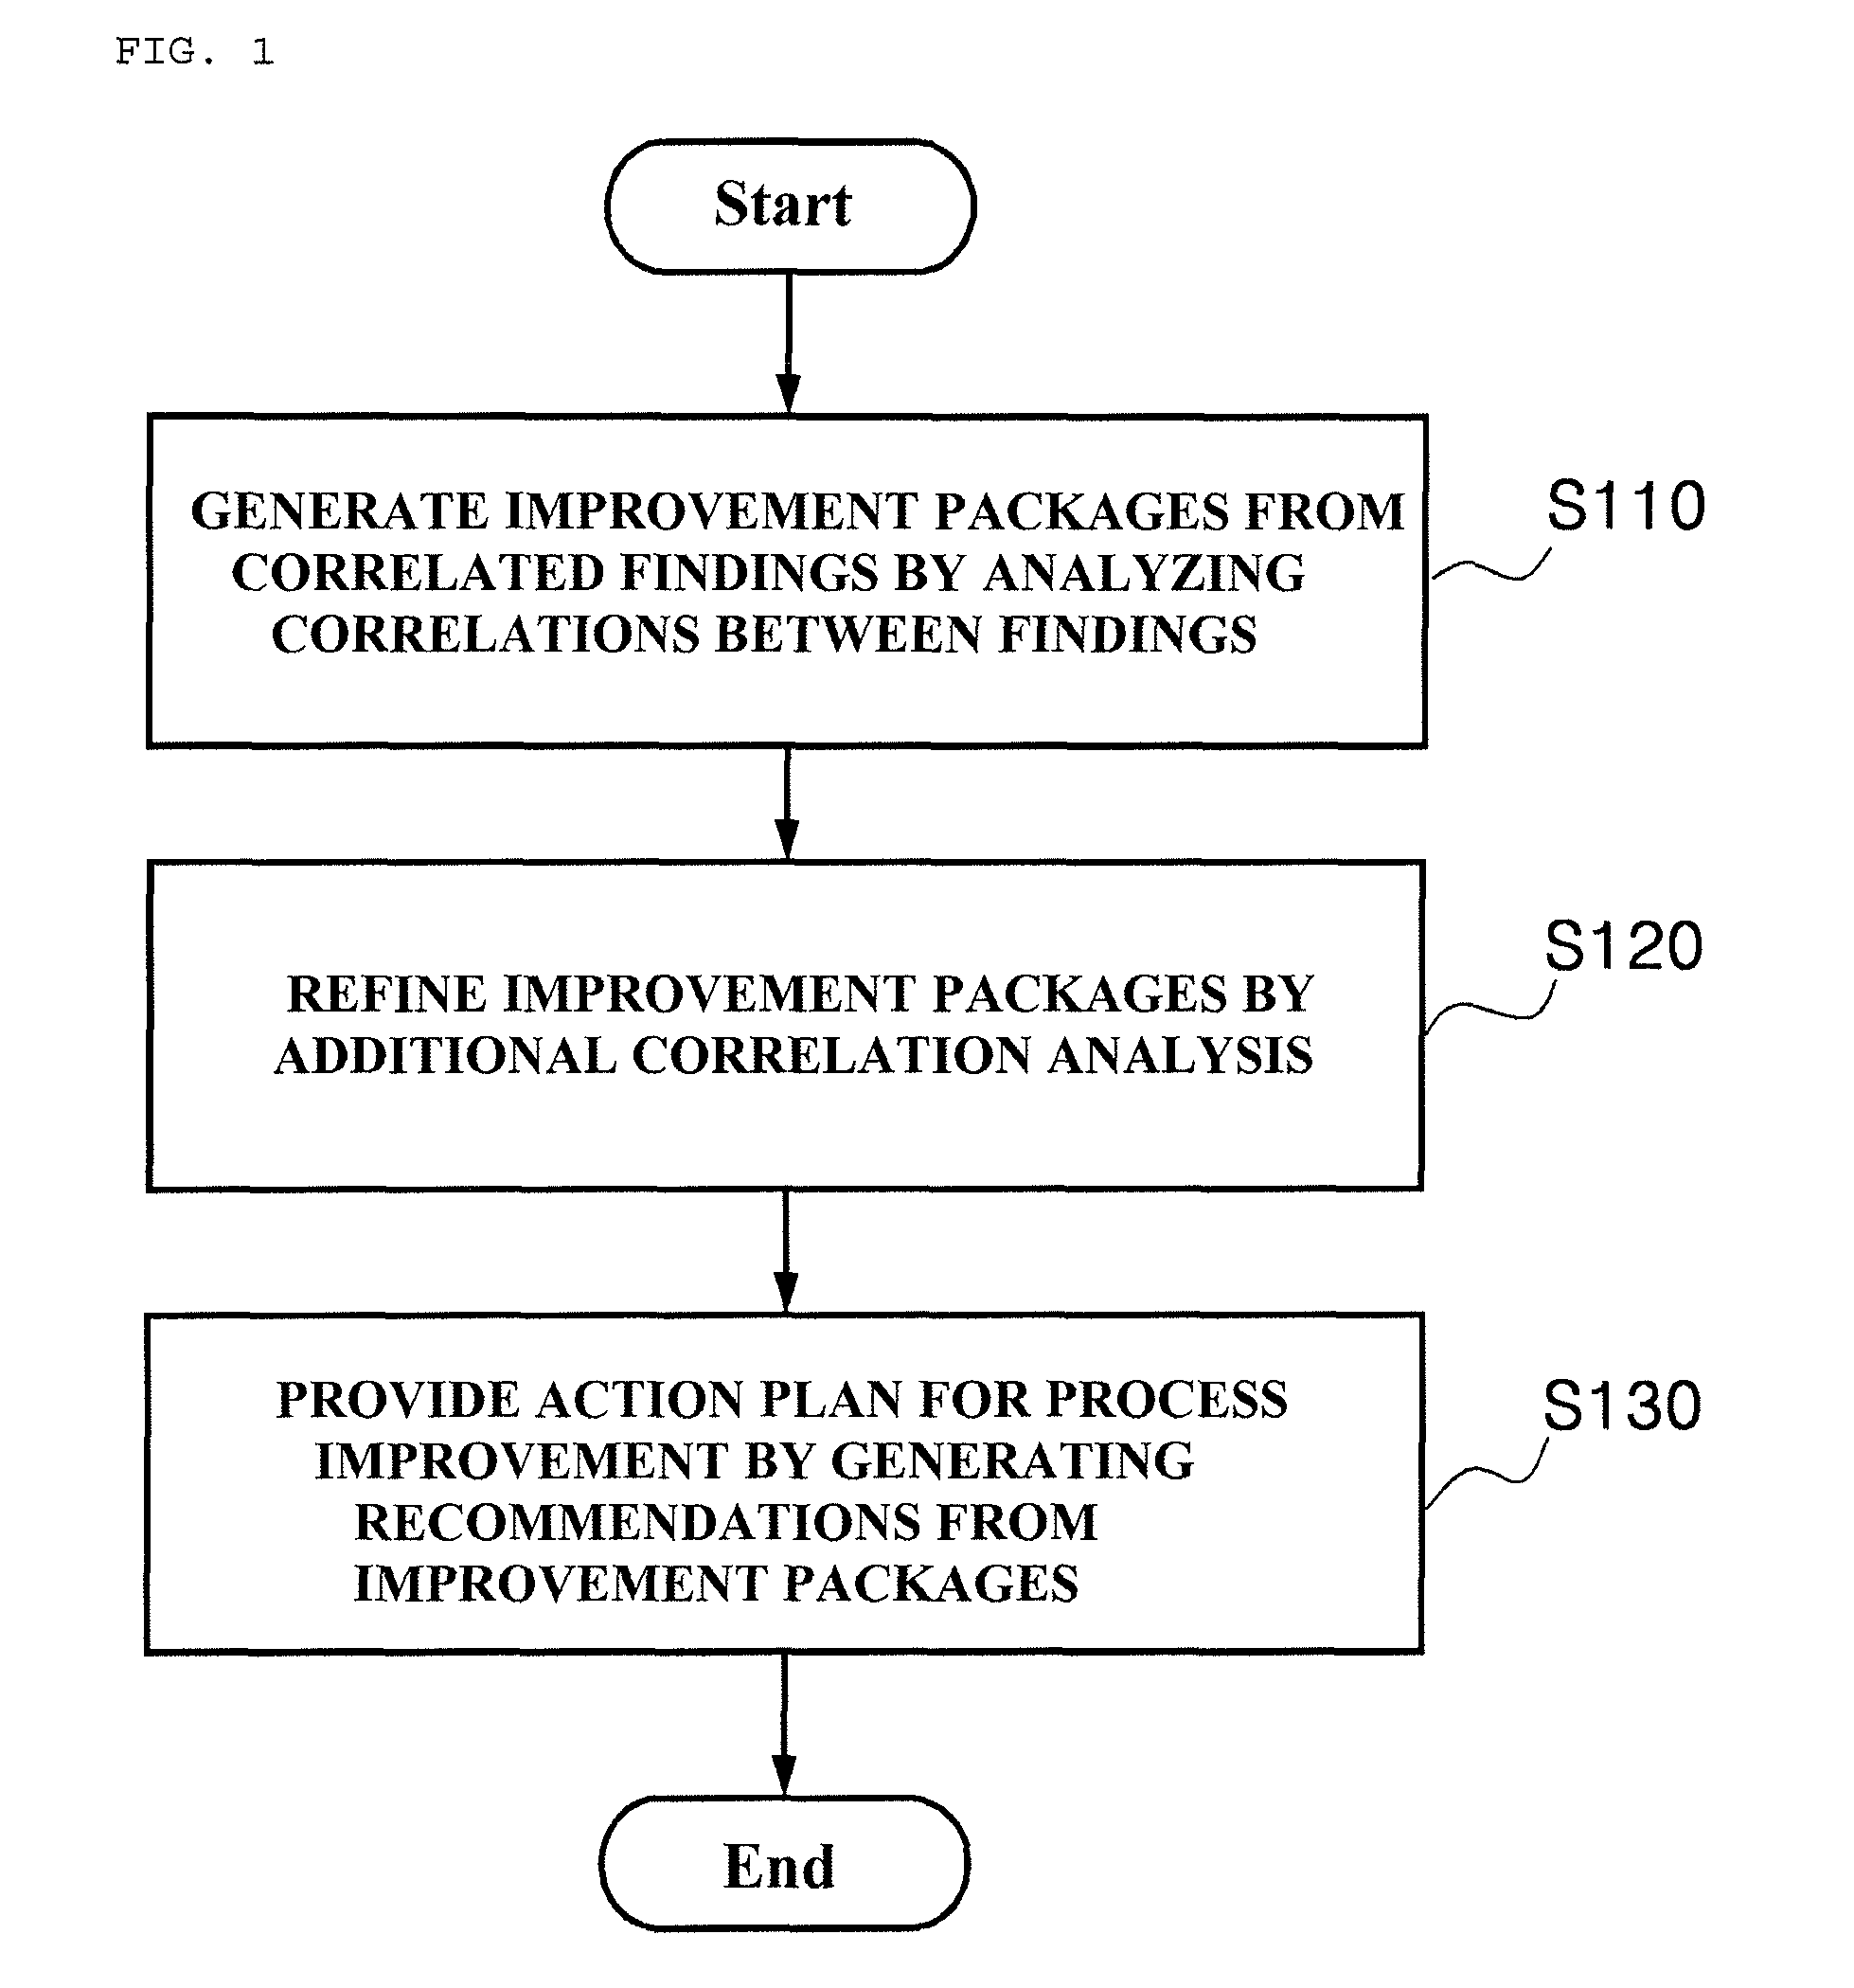 Apparatus and method for recommending software process improvement